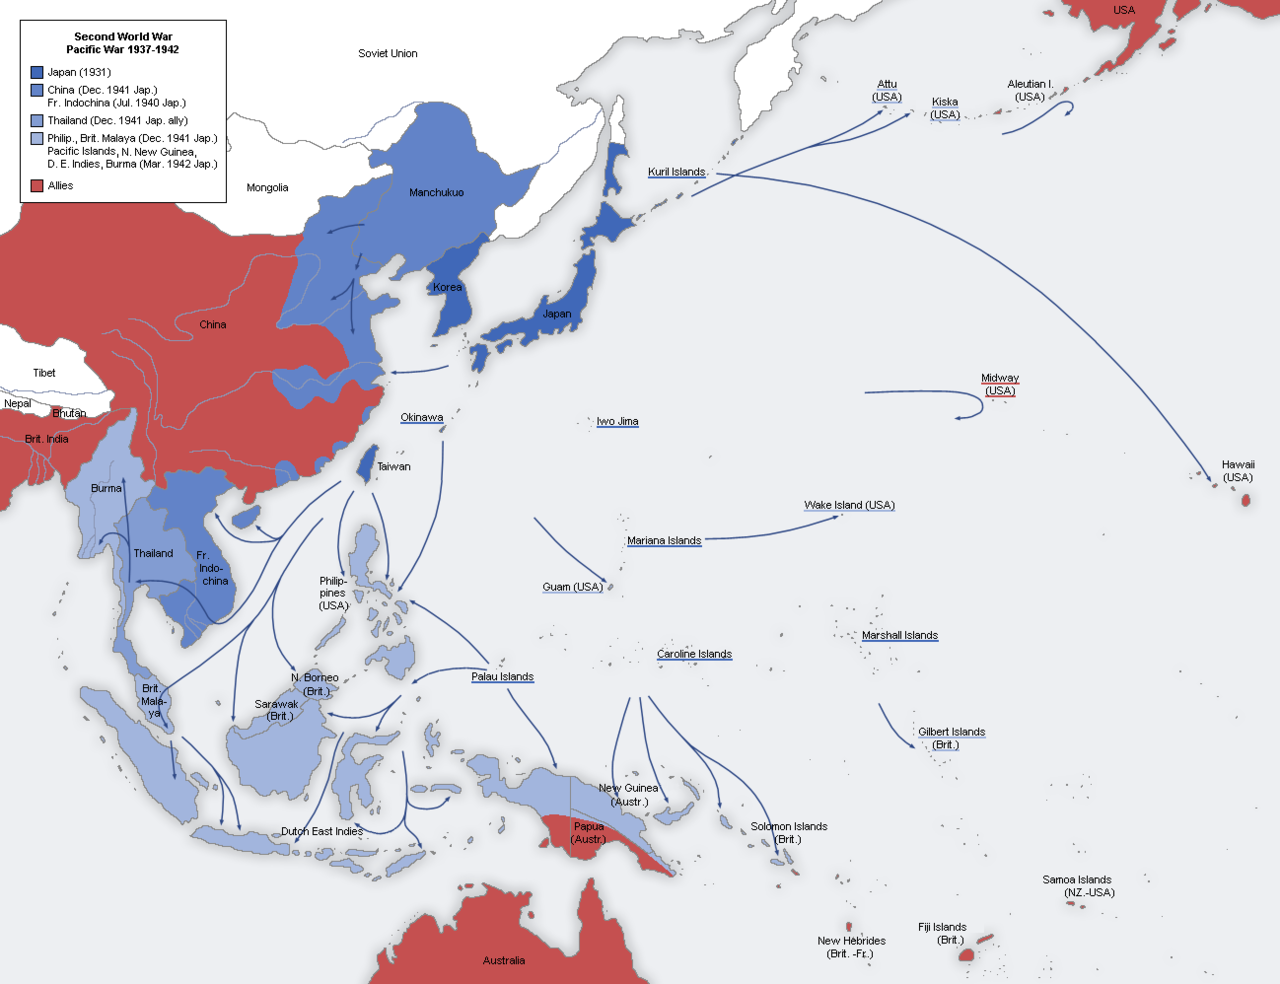 Map of Japanese conquests from 1937 to 1942